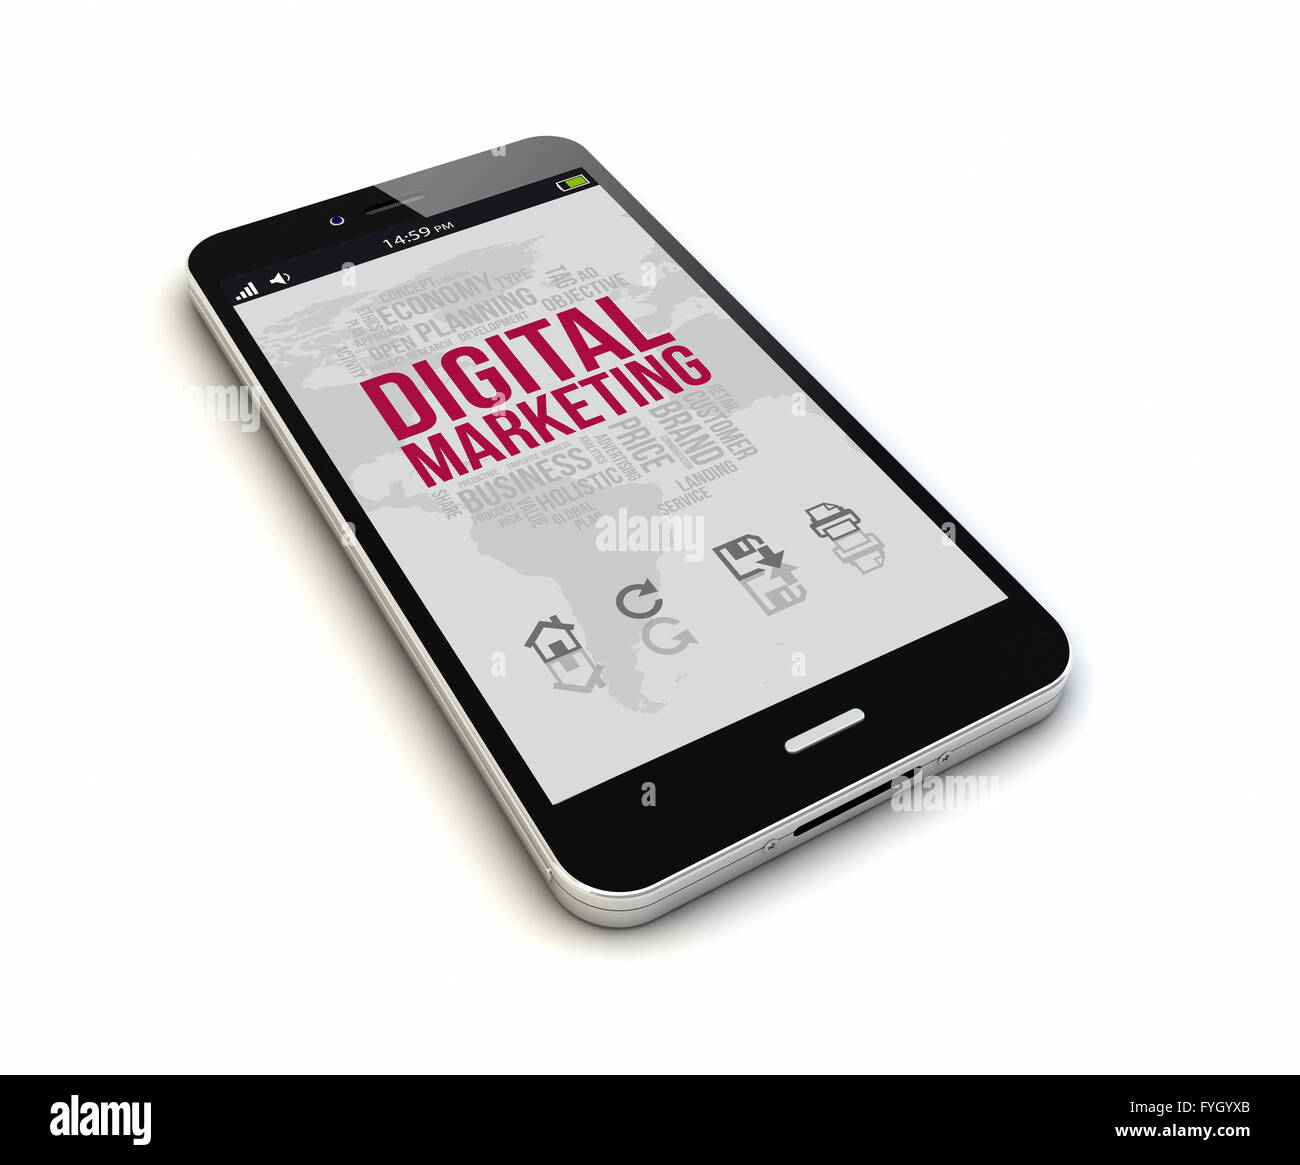 render of an original smartphone with digital marketing on the screen Stock Photo